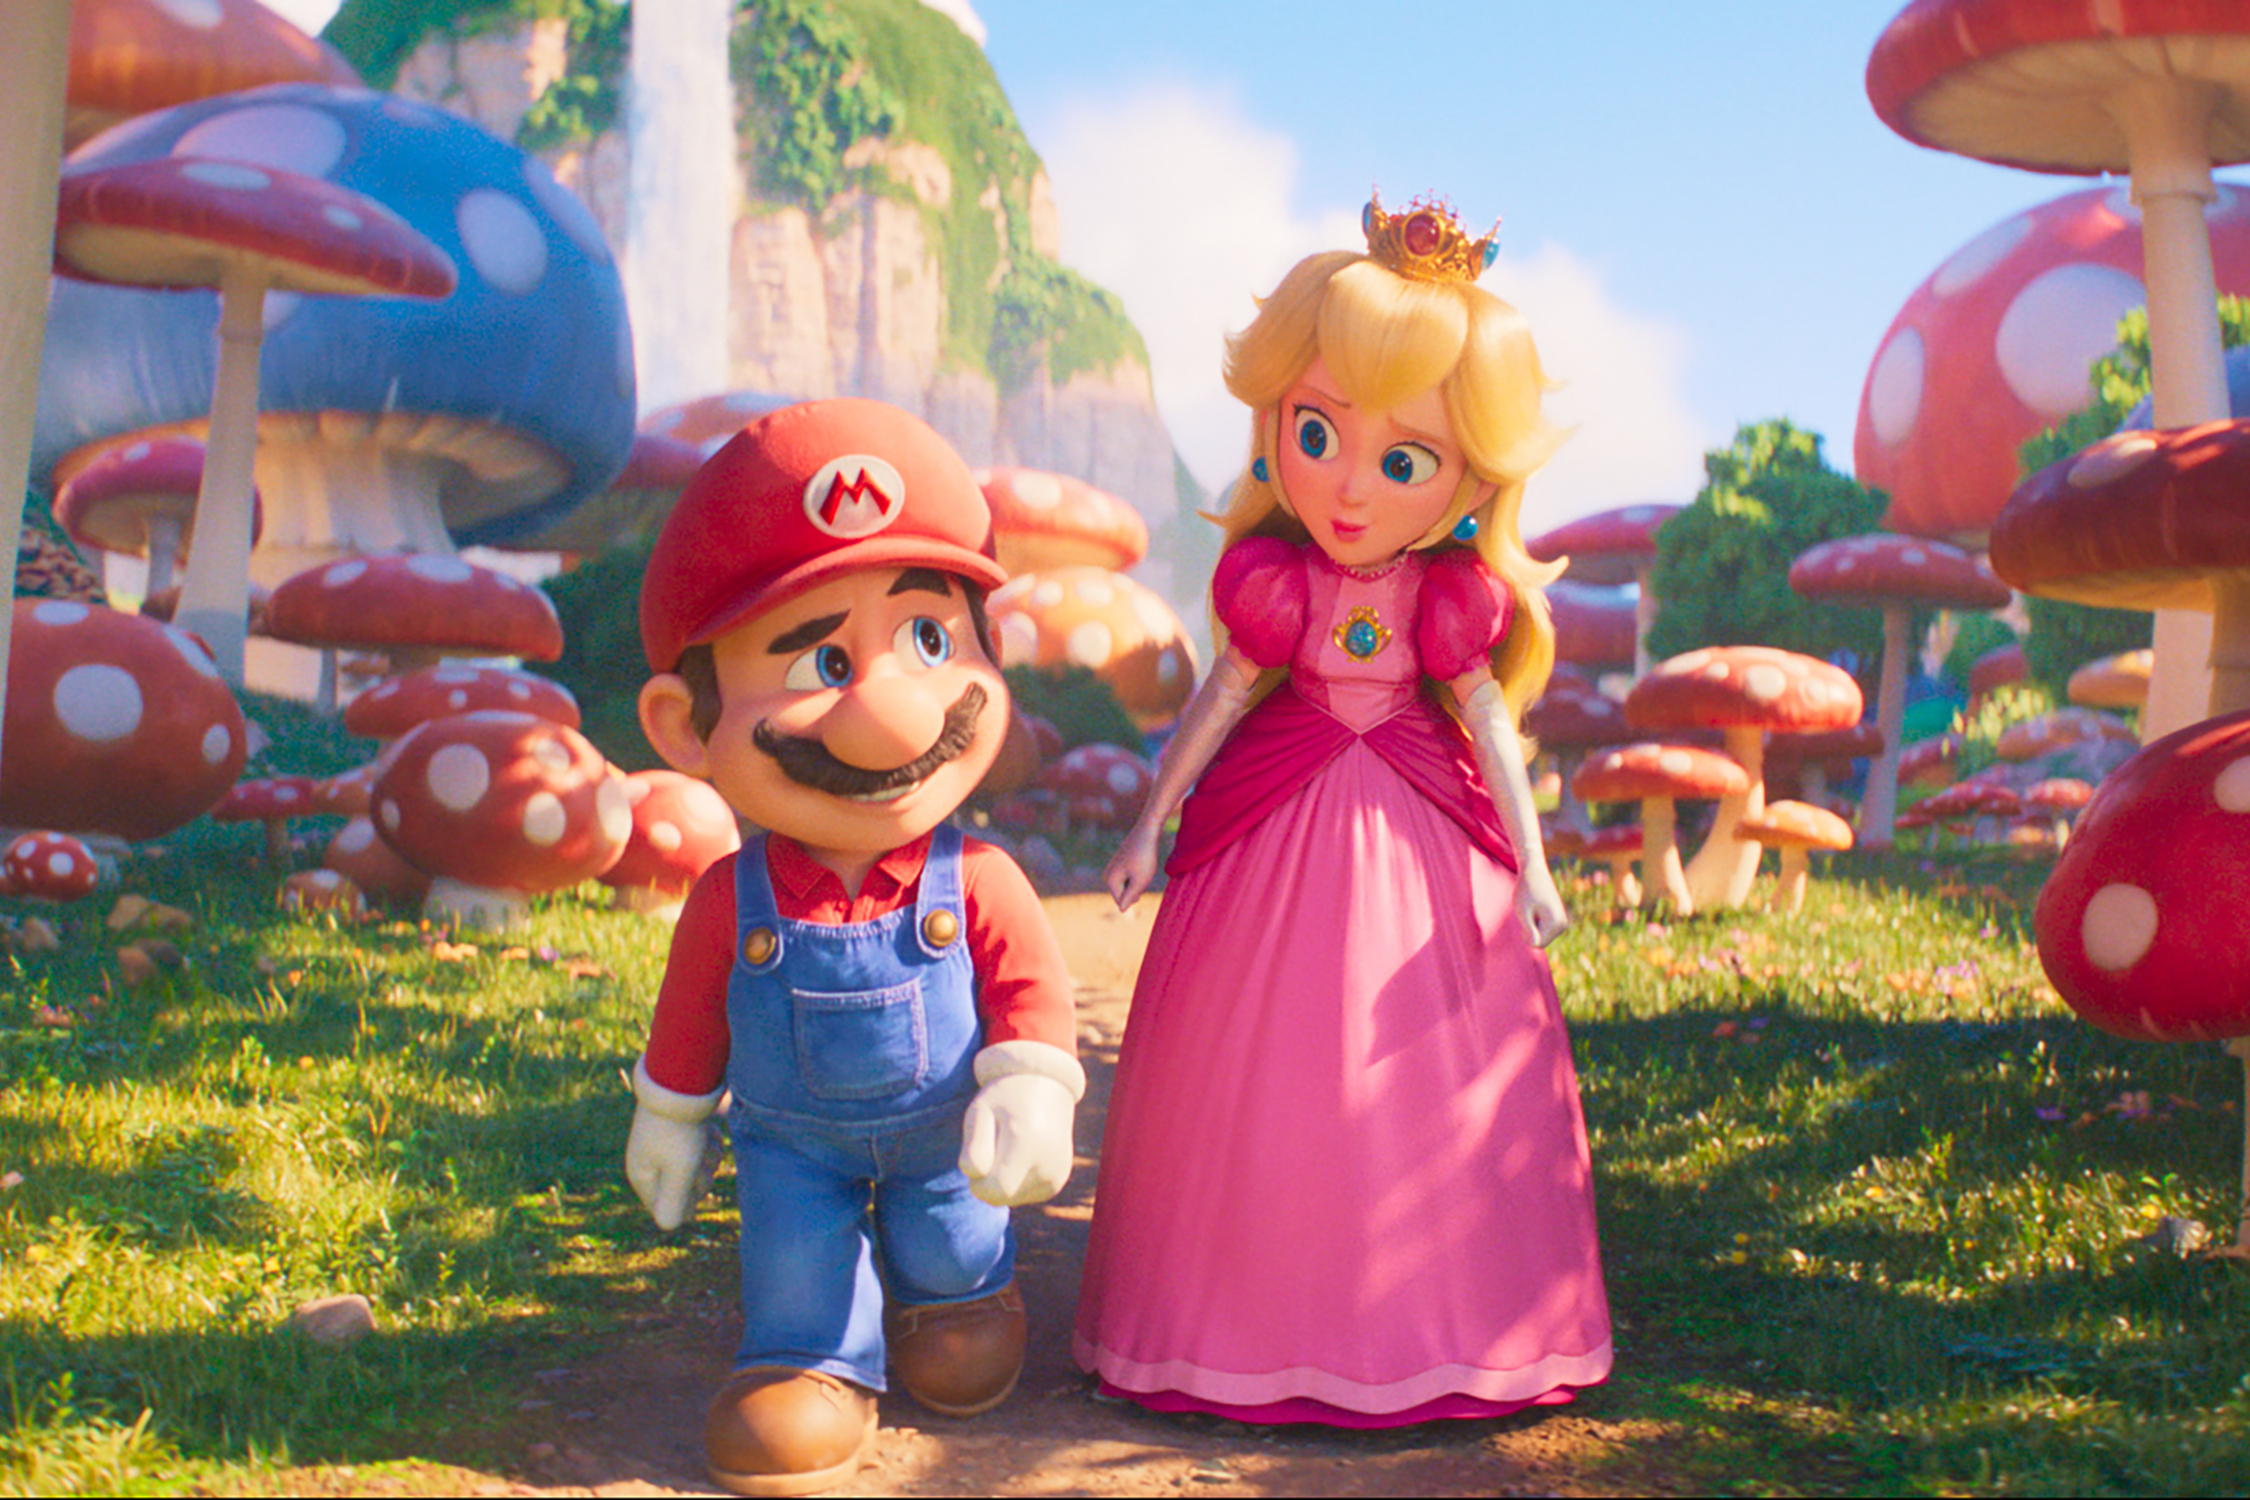 Super Mario Odyssey is the fastest-selling Mario game in the U.S. - Polygon